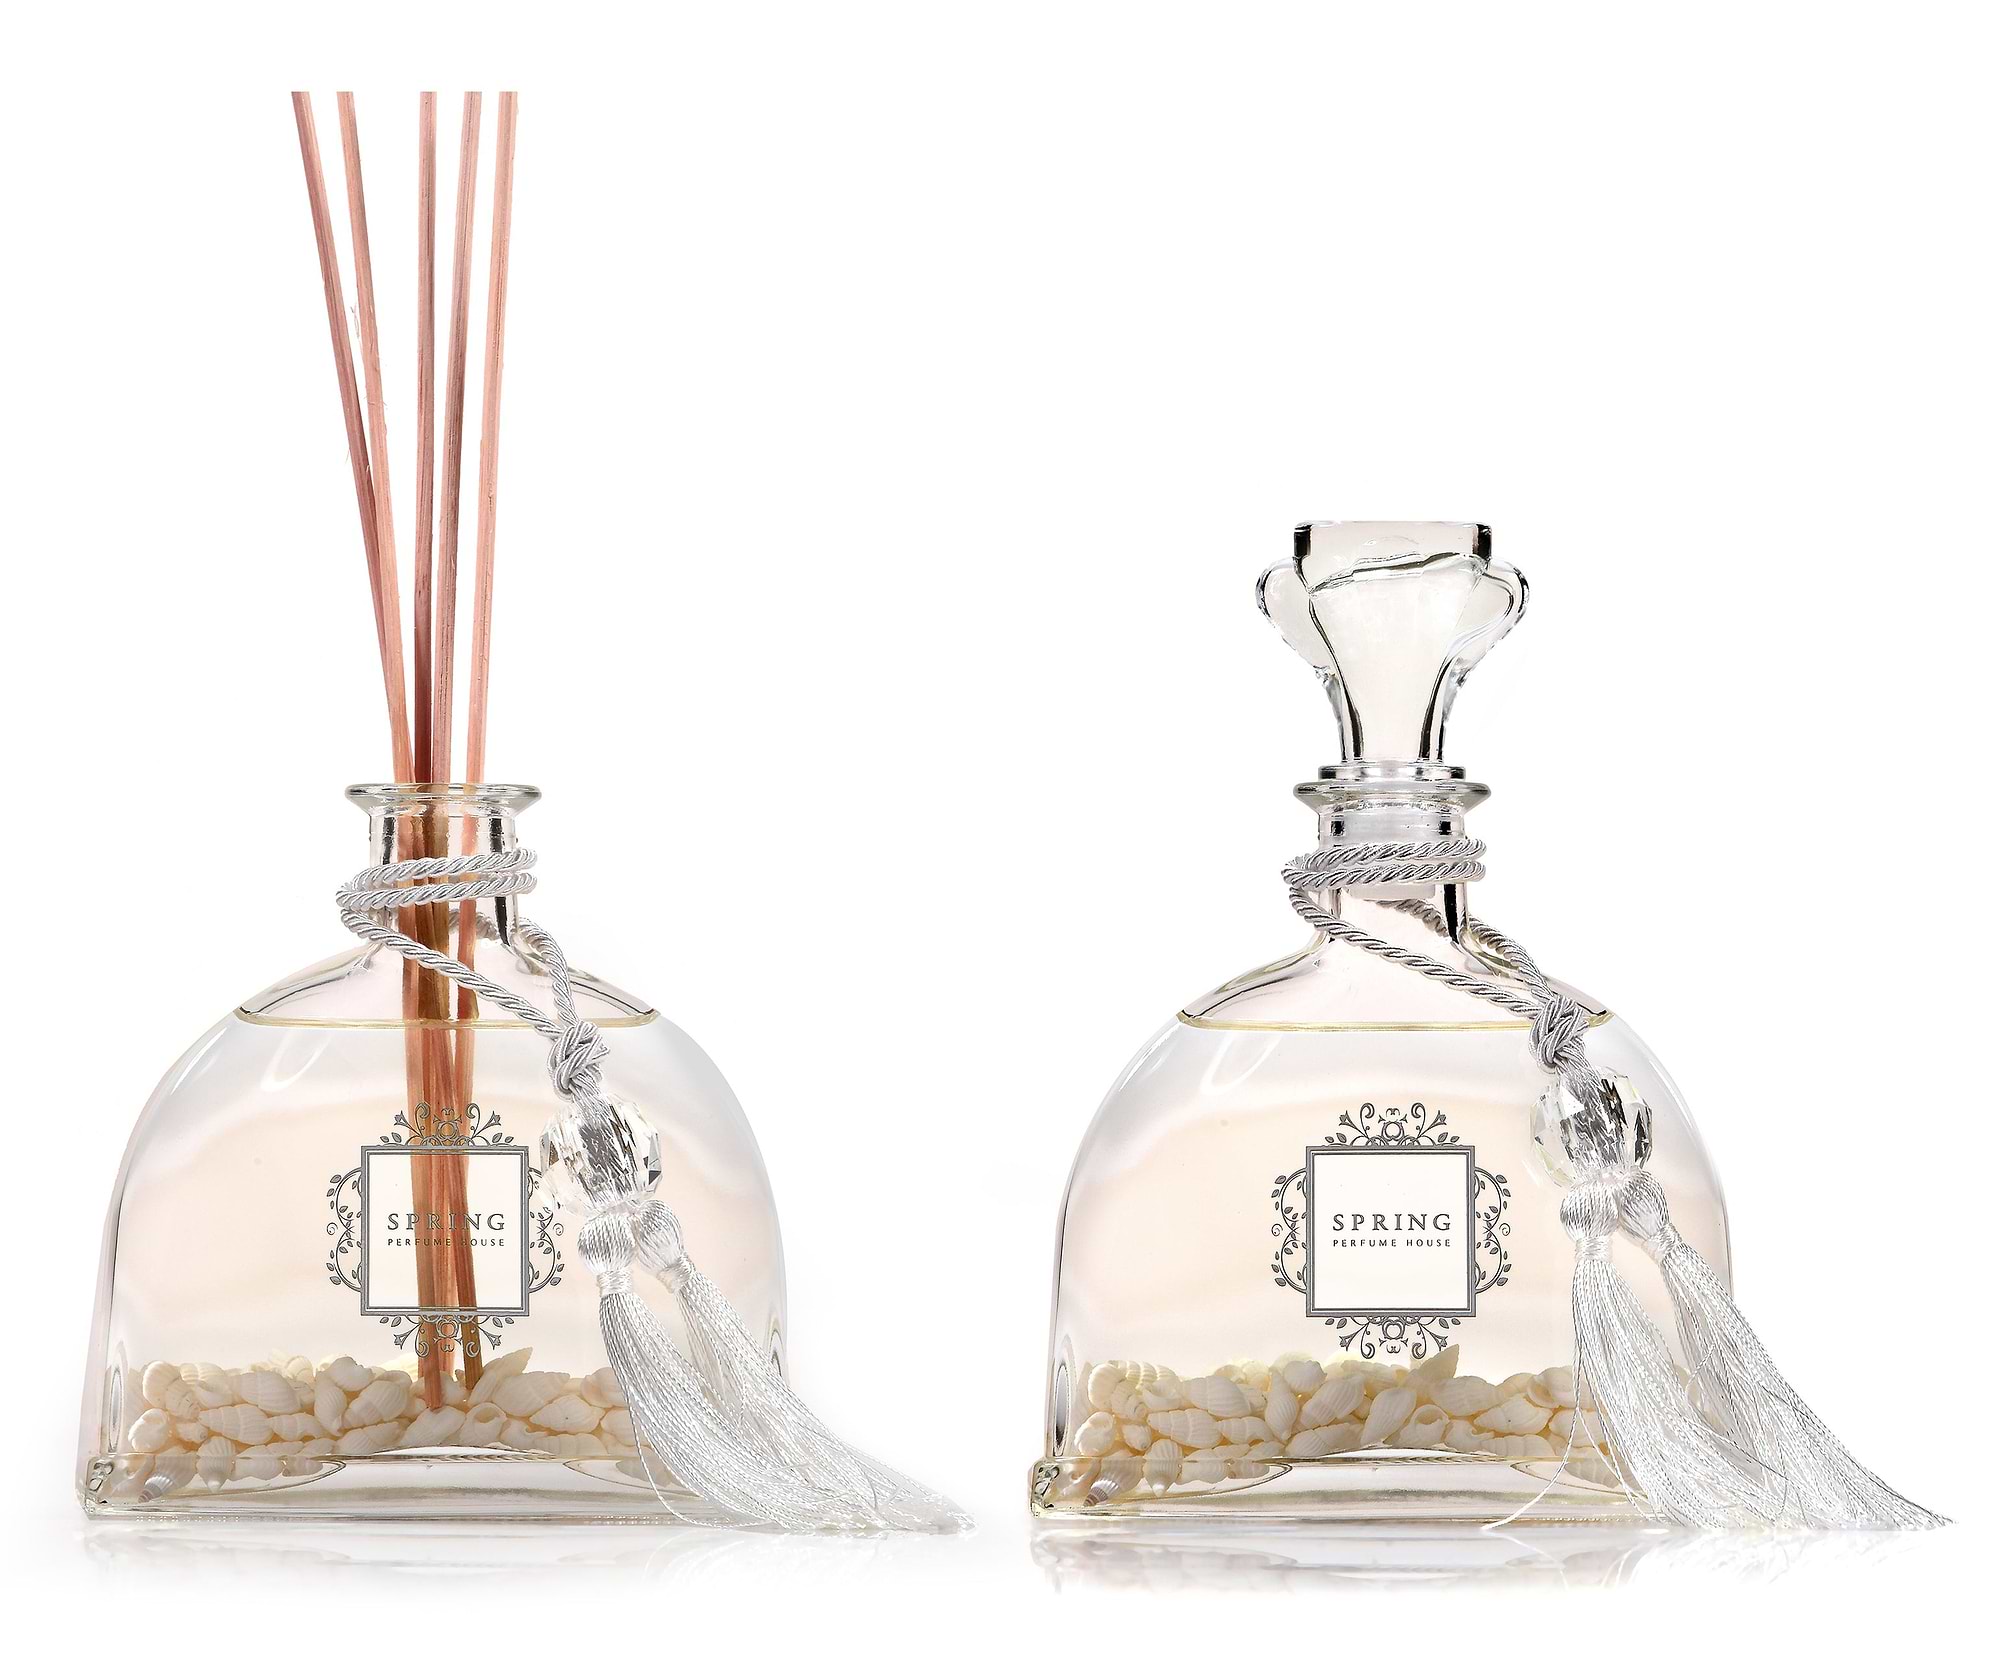 SPRING Fragrance Reed Diffuser Set |10.14oz (300ml) Ocean Design |Fragrance Made in France |Home Décor |Scented Aromatic Oil |Room Air Freshener White Flower | Alcohol + Ethanol free and VOC Compliant